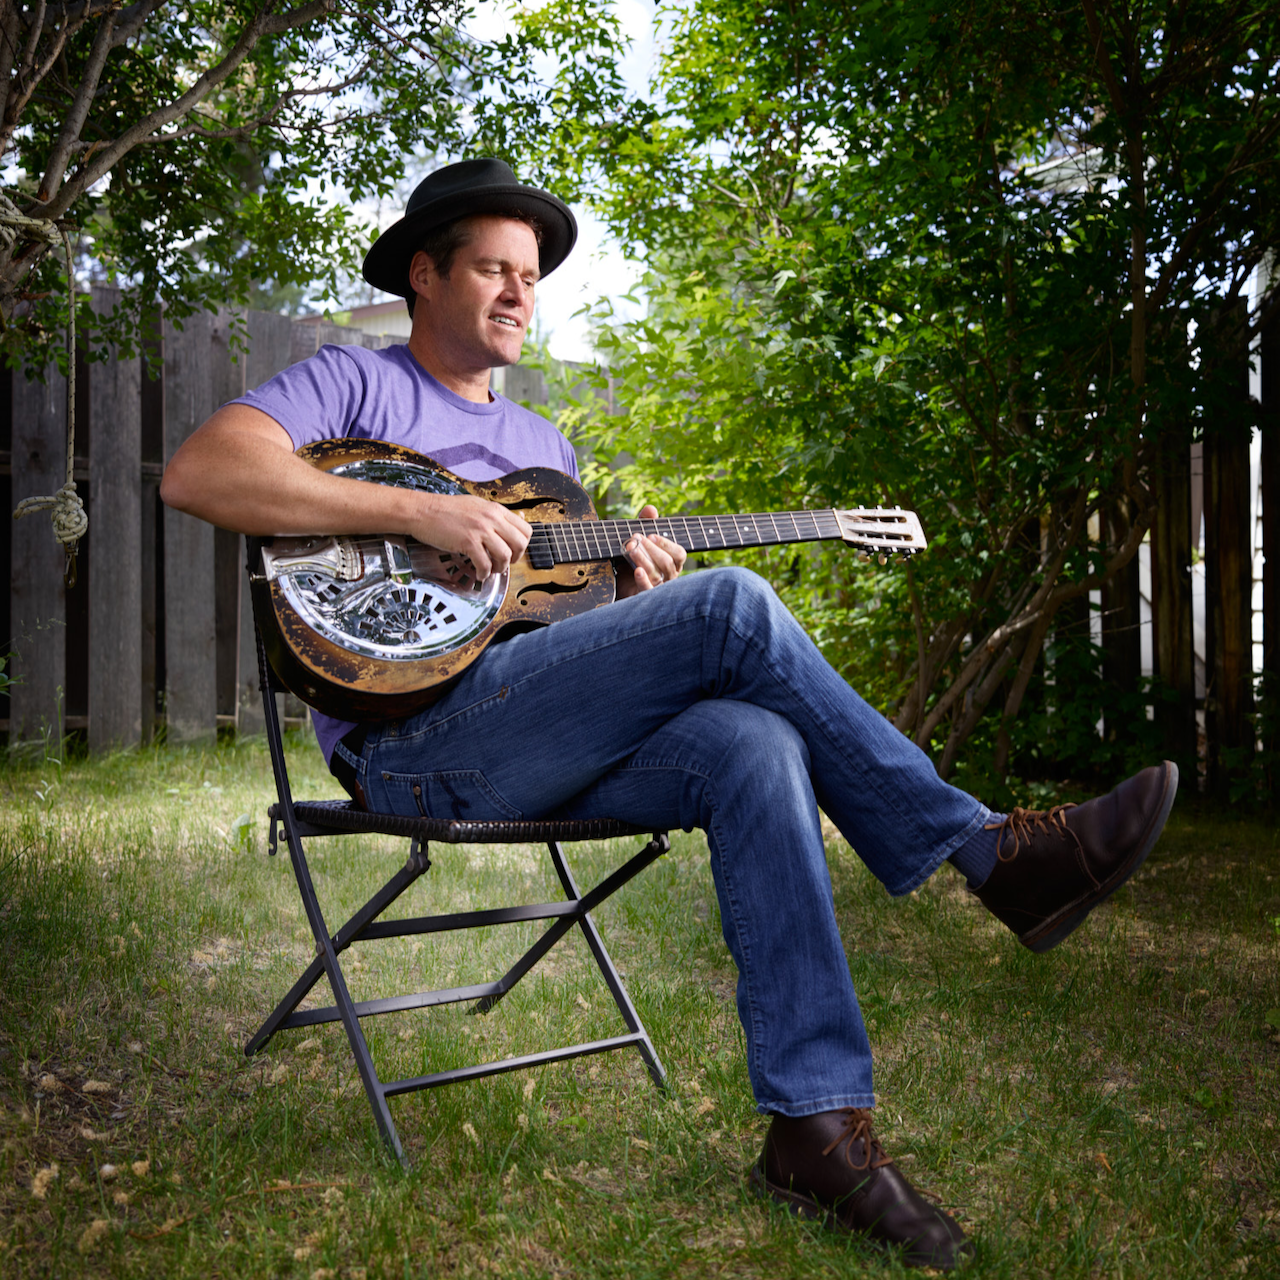 Tray Wellington Conquers World of Bluegrass With His Five-String Banjo